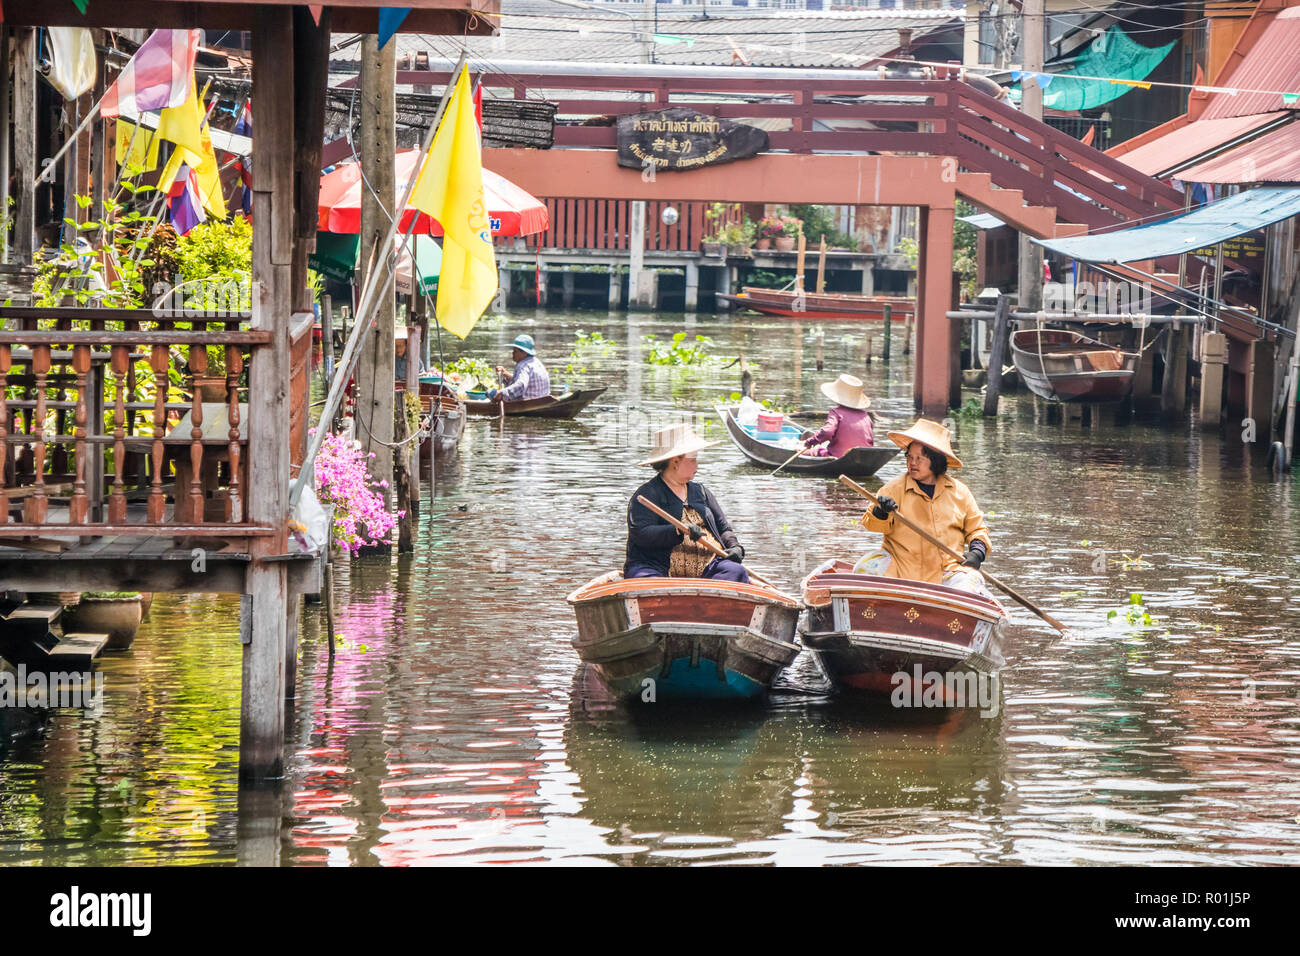 Damnoen Saduak, Thailand  - 8th October 2018: Vendors in boats at the floating market. The market is a very poular tourist destination. Stock Photo